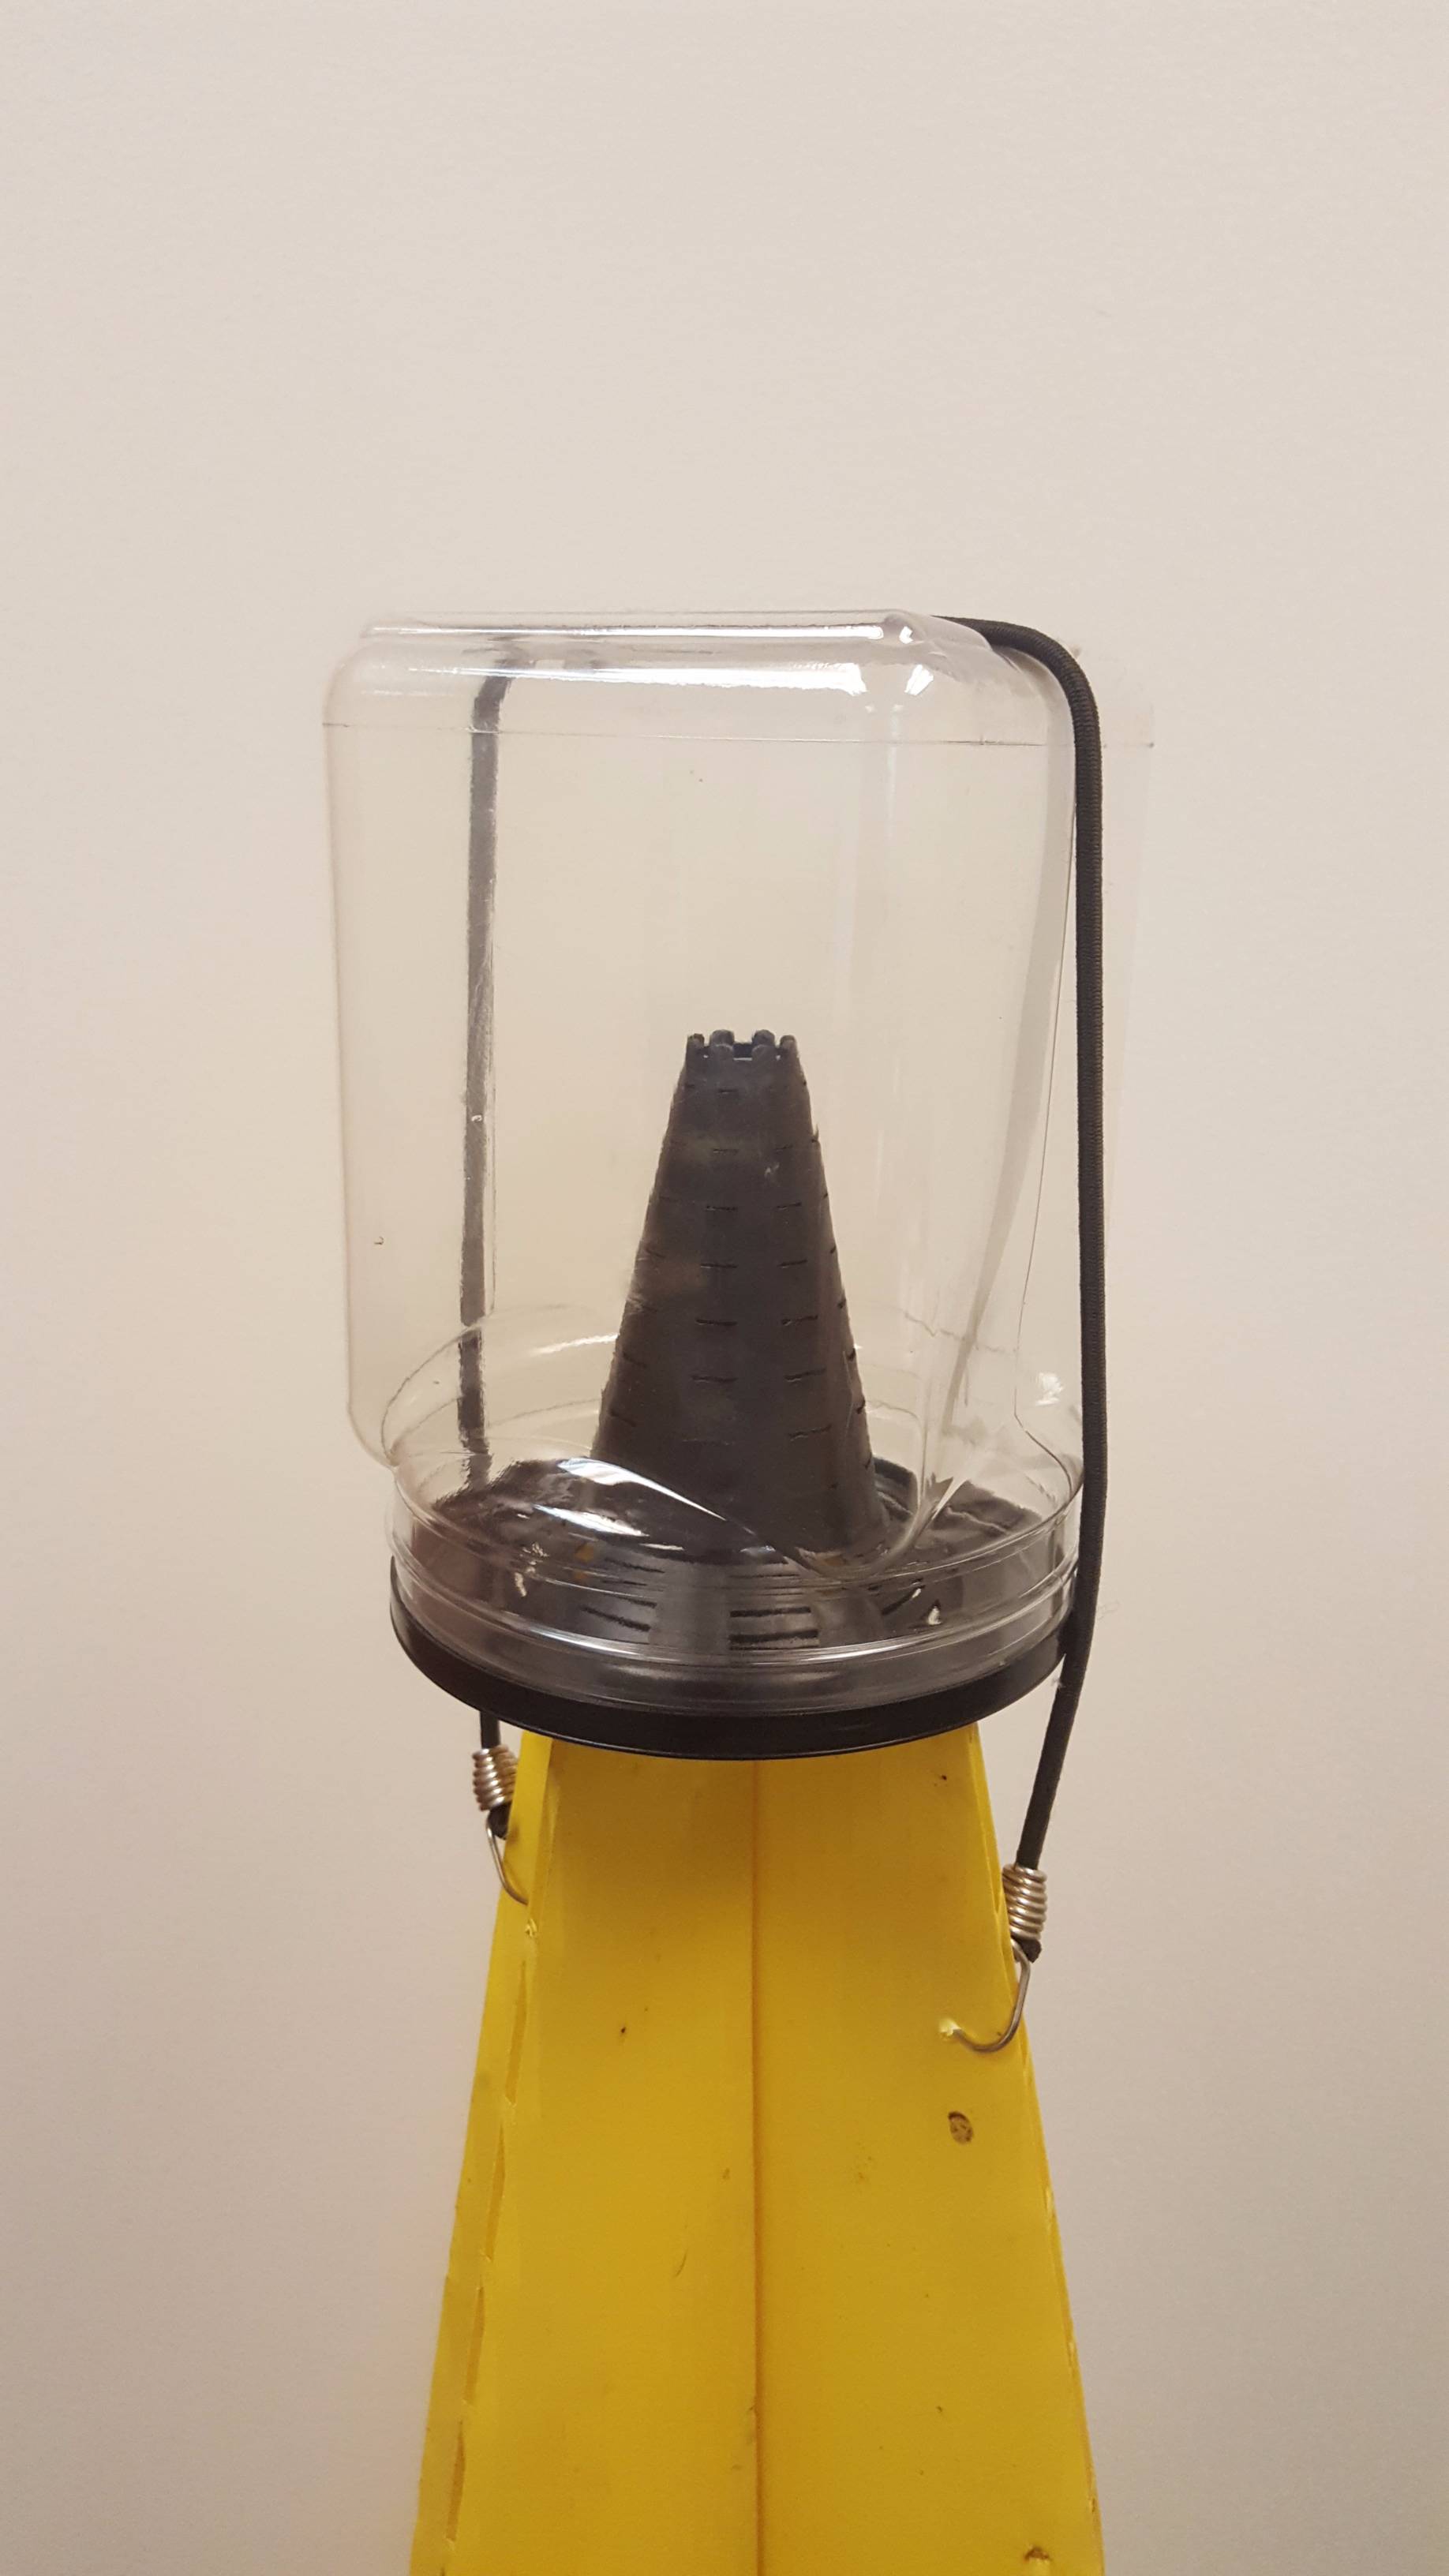 commercial stink bug trap